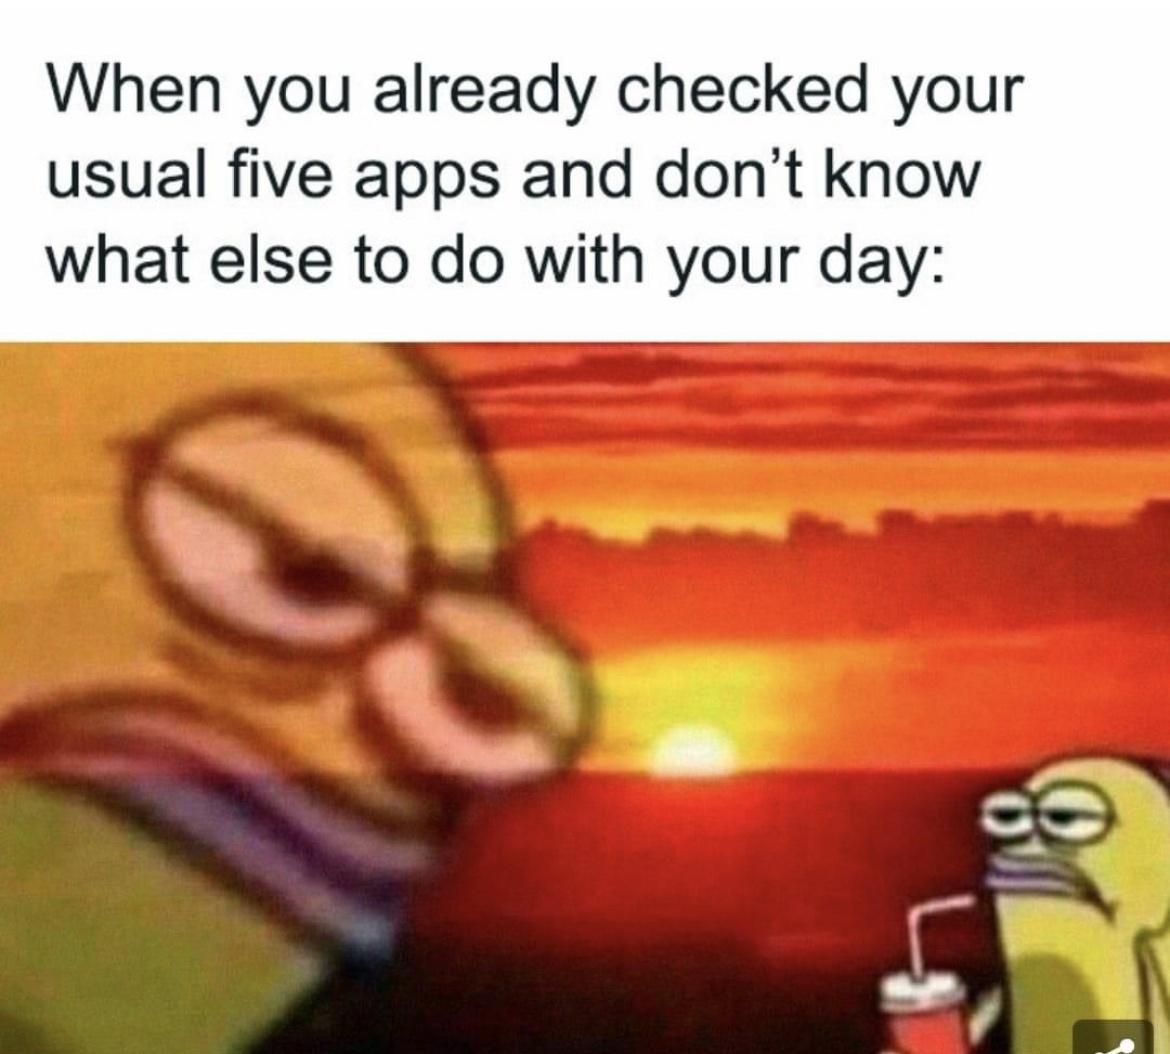 funny memes - cartoon - When you already checked your usual five apps and don't know what else to do with your day 0